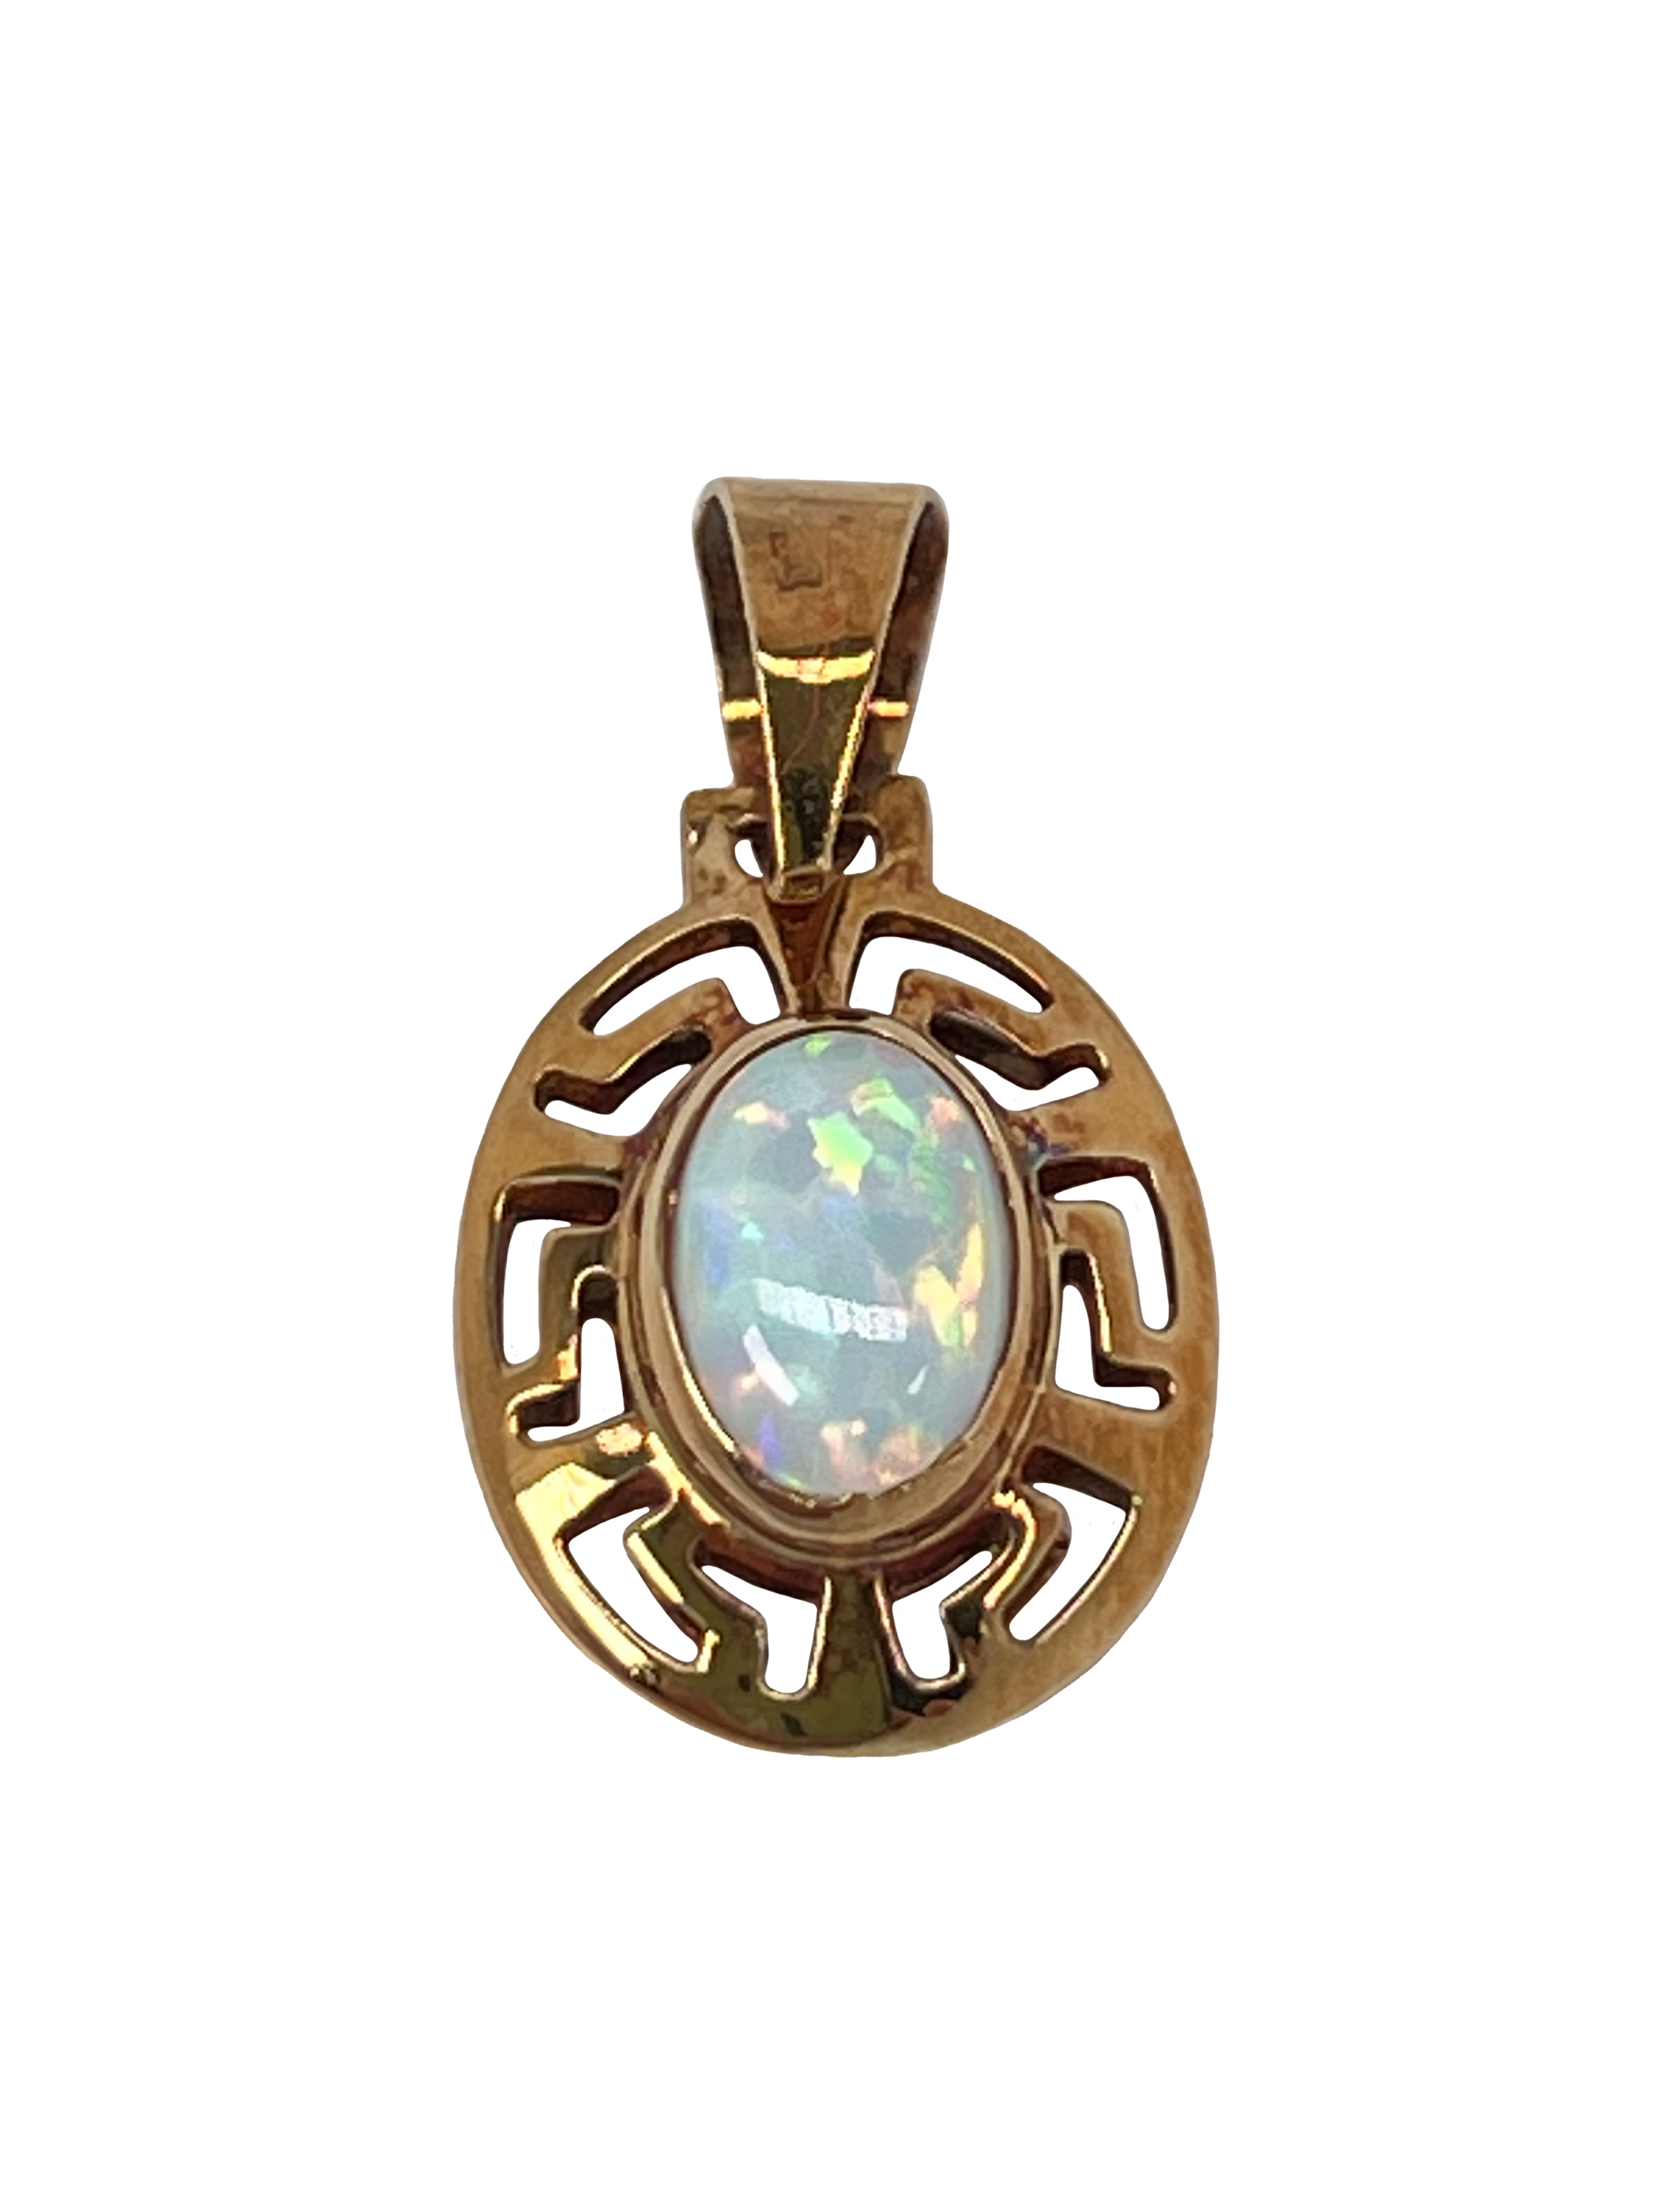 Gold pendant made of rose gold with opal and antique patterns